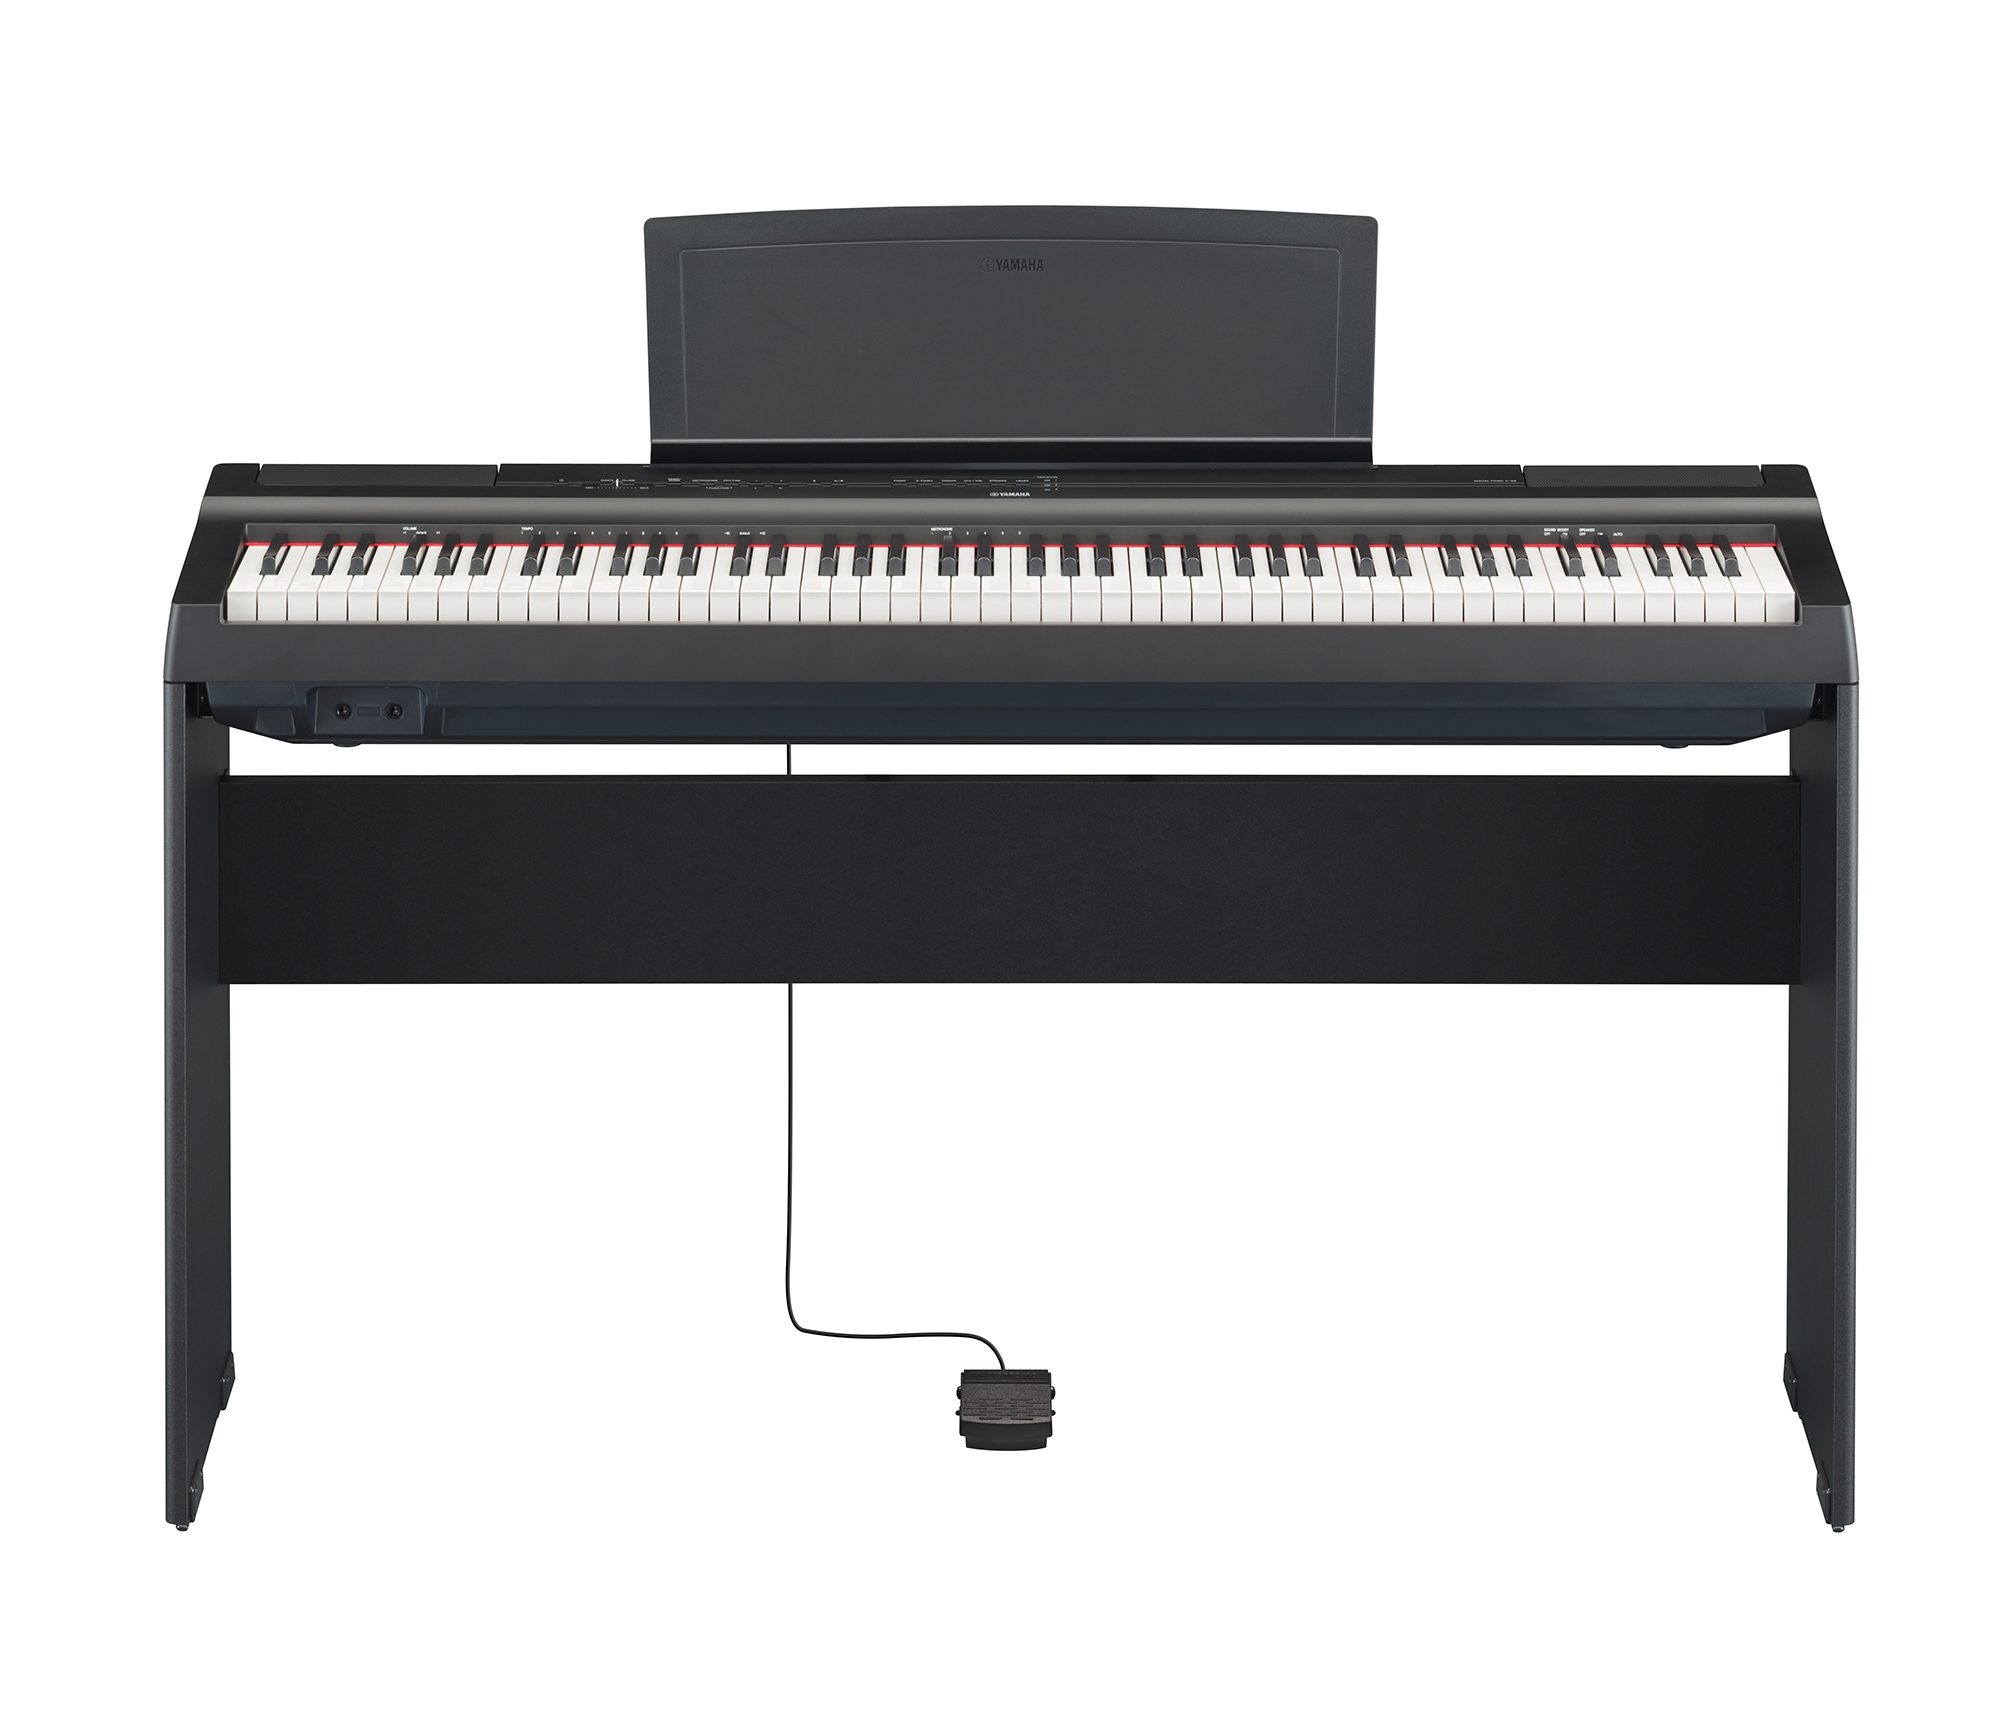 P-125 - Overview - P Series - Pianos - Musical Instruments 